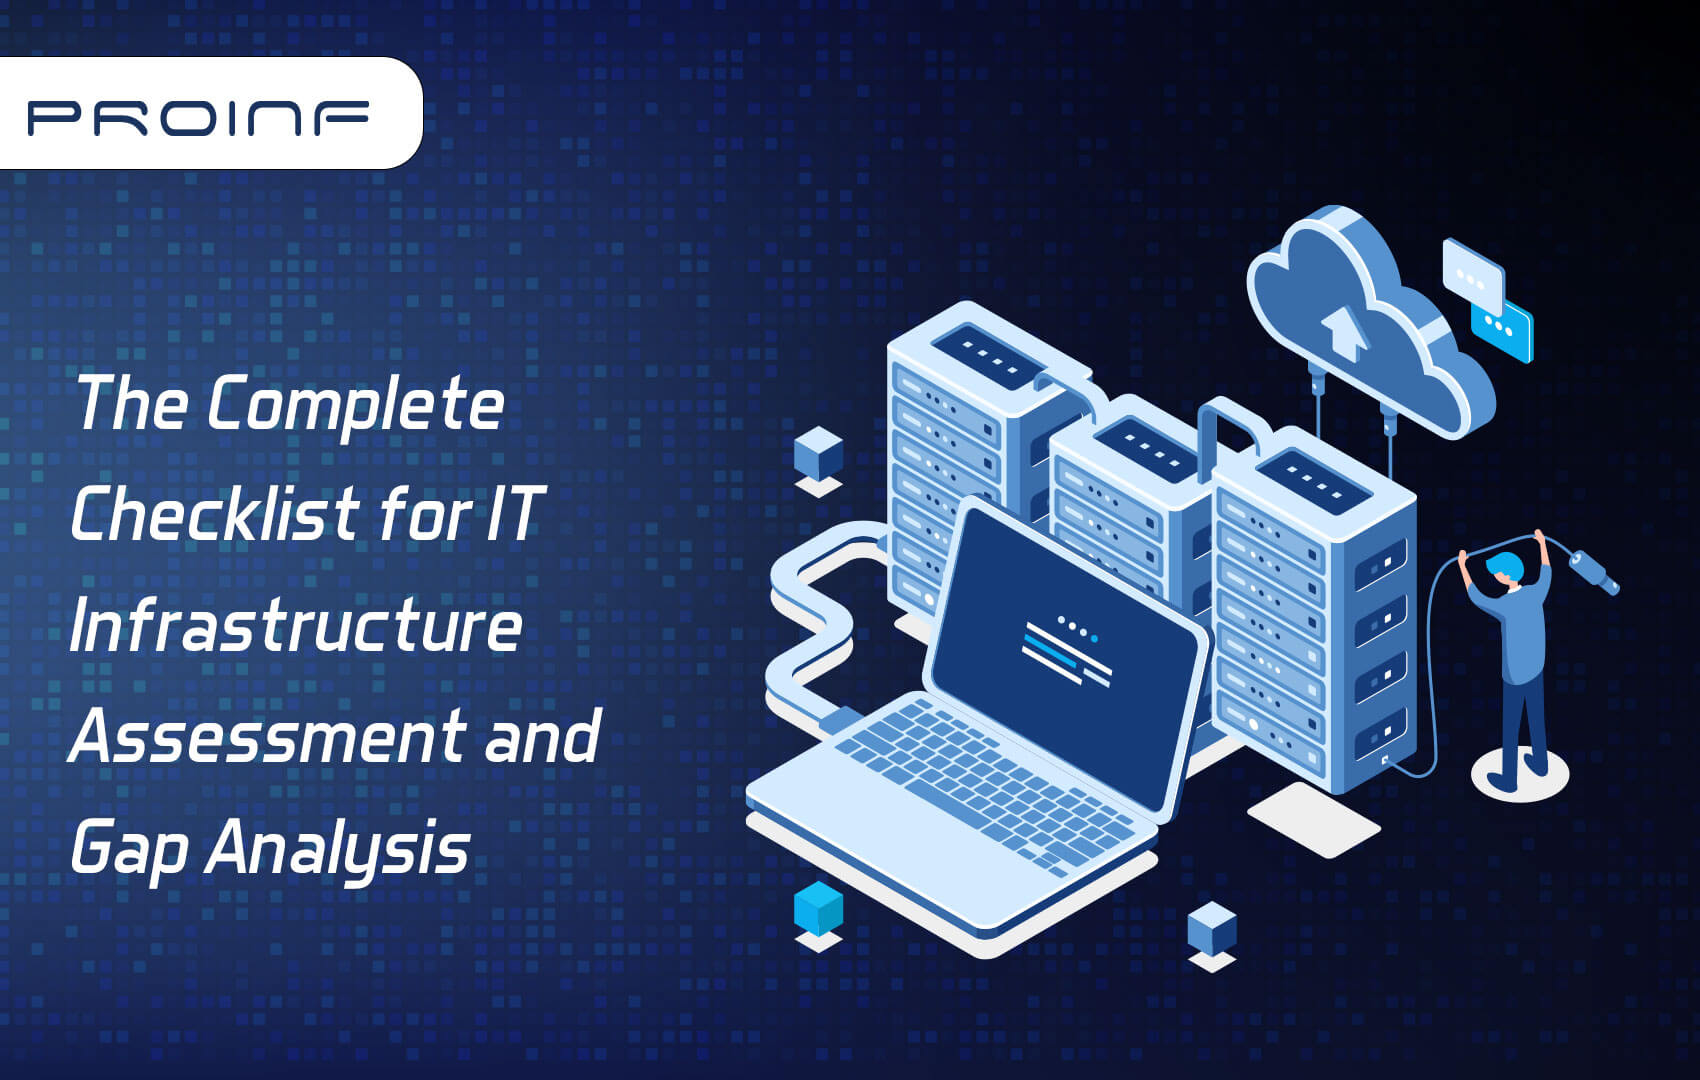 The Complete Checklist for IT Infrastructure Assessment and Gap Analysis